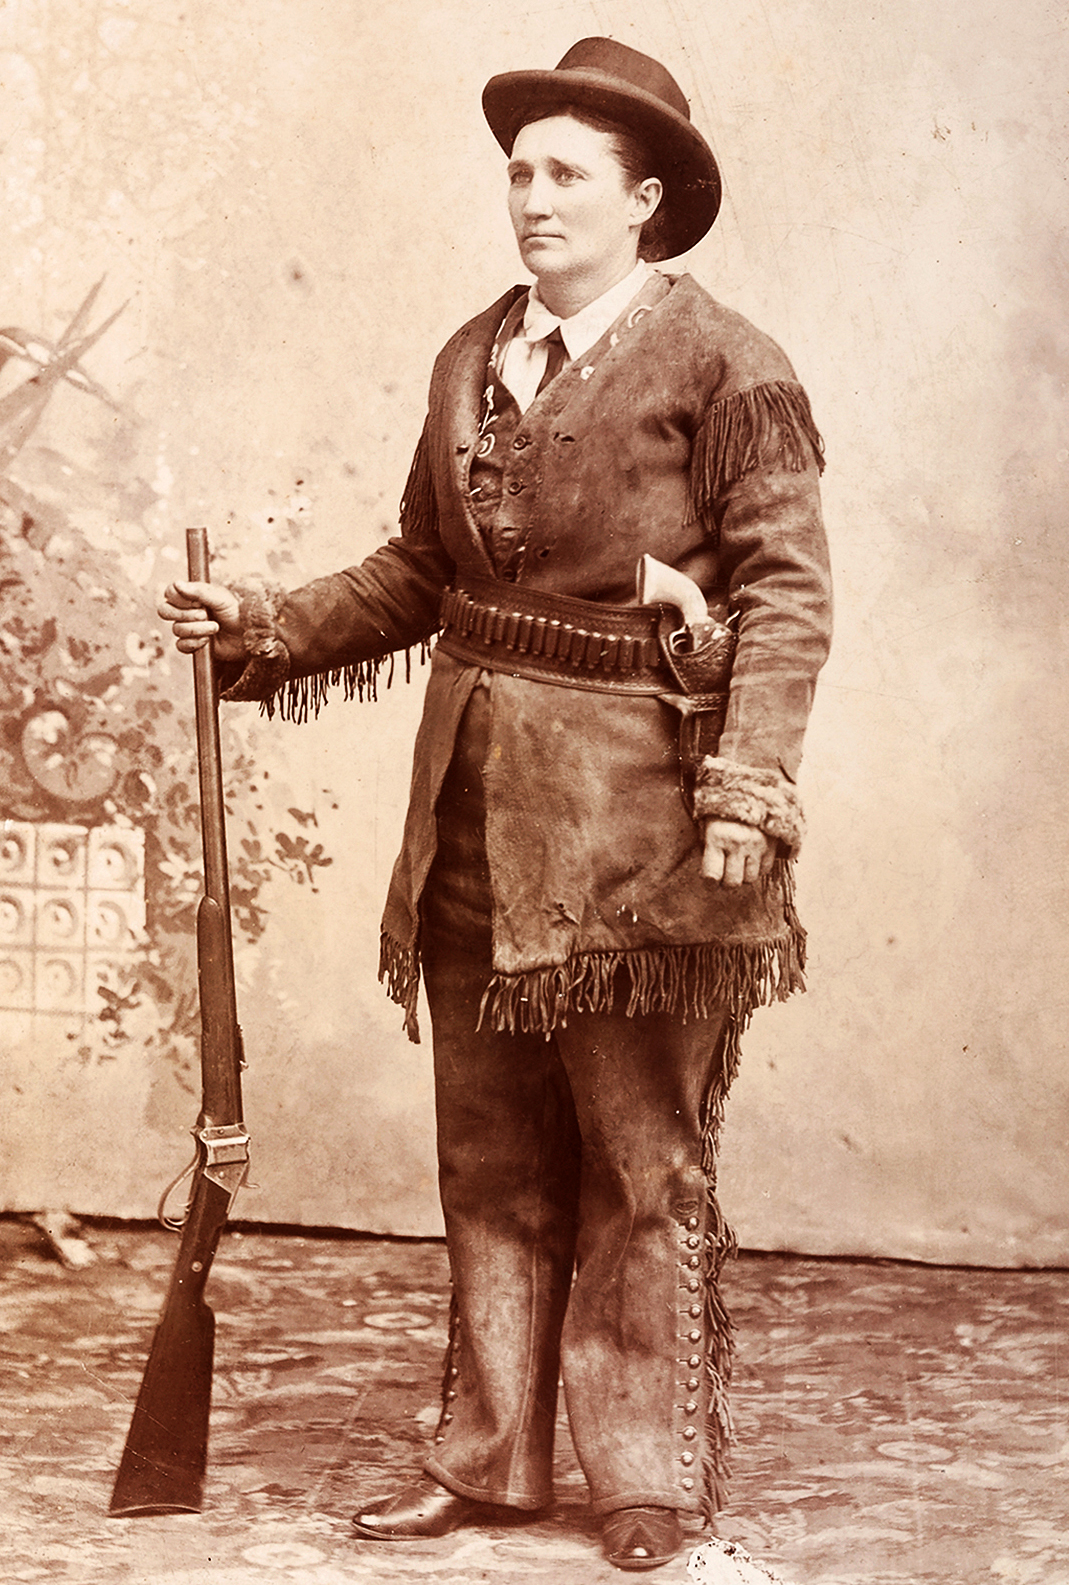 Calamity Jane, Legend of the West)